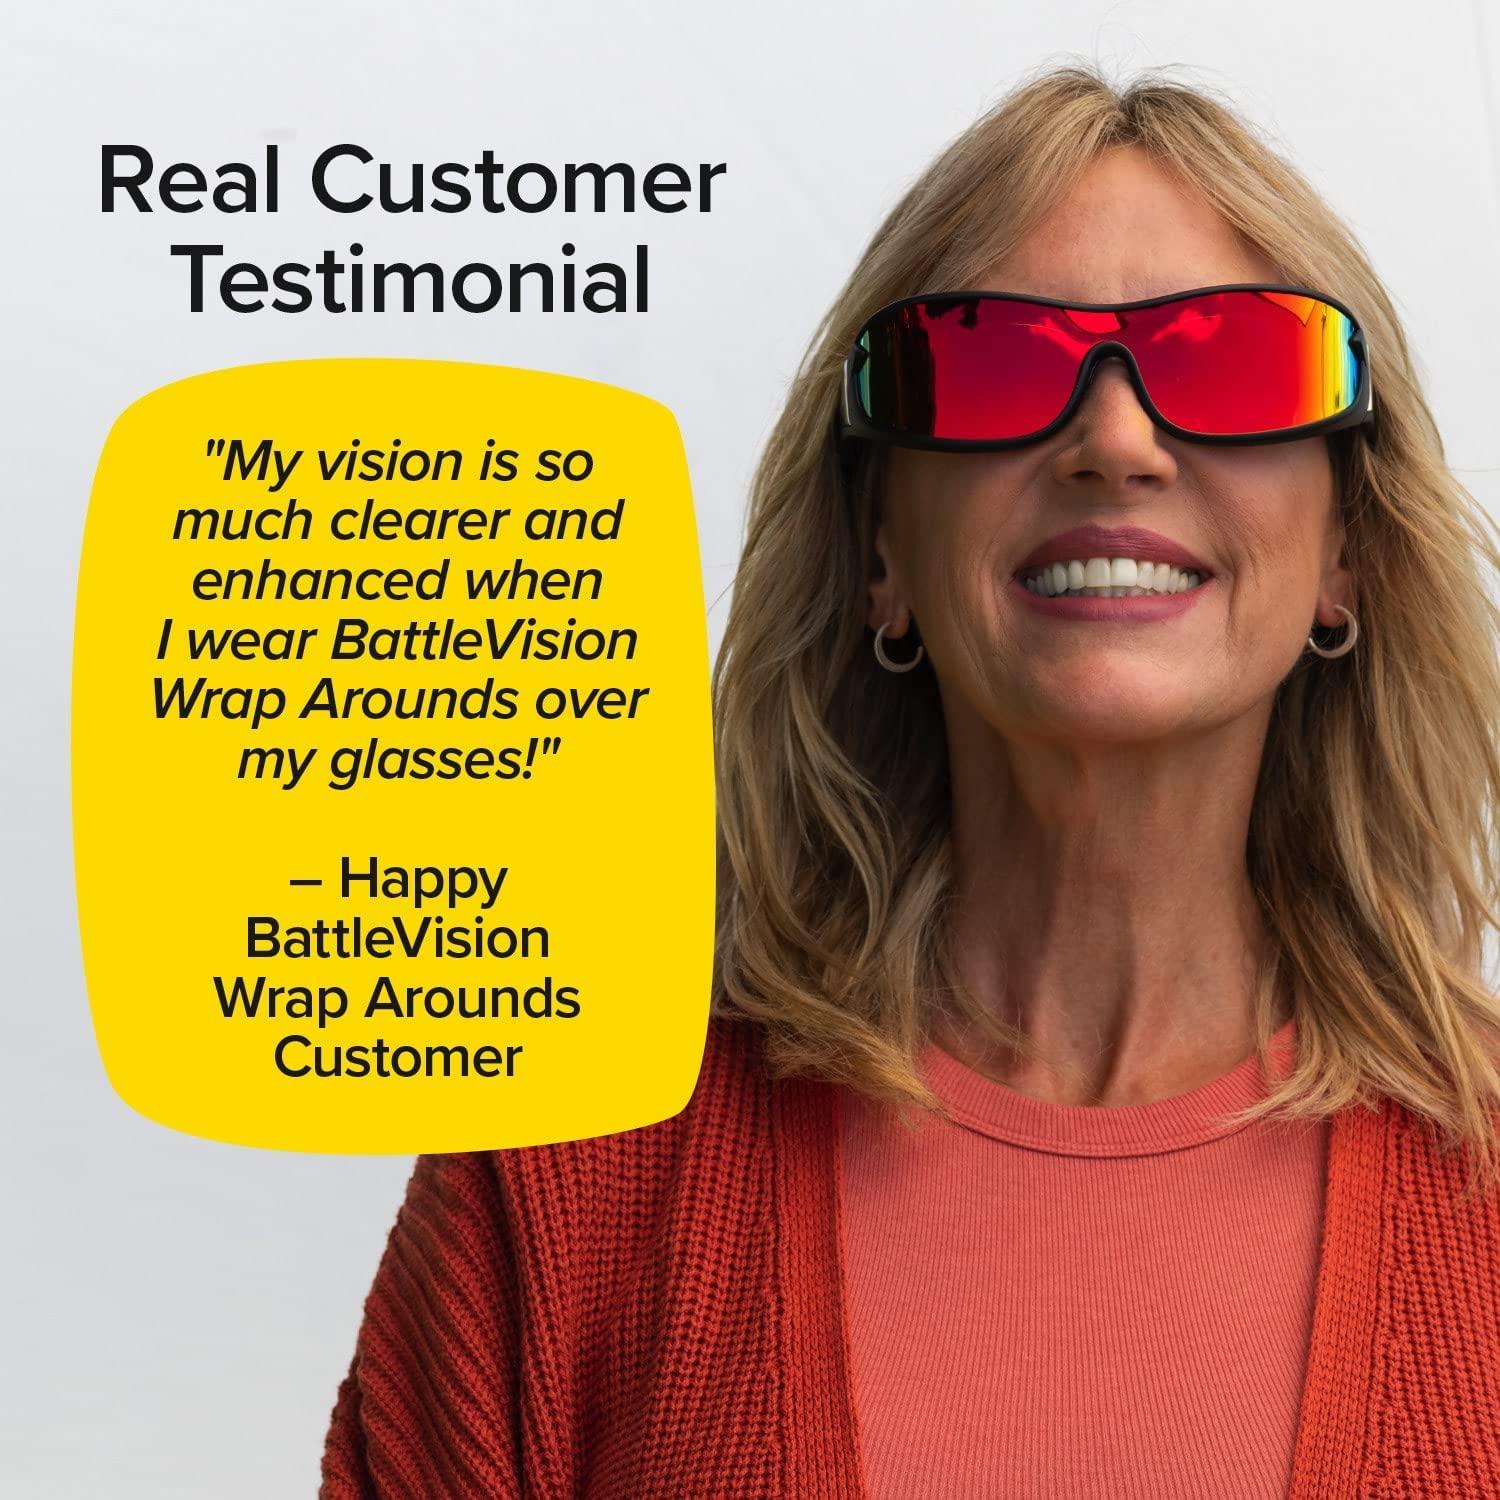 BattleVision Wrap Arounds HD Polarized Sunglasses, As Seen On TV